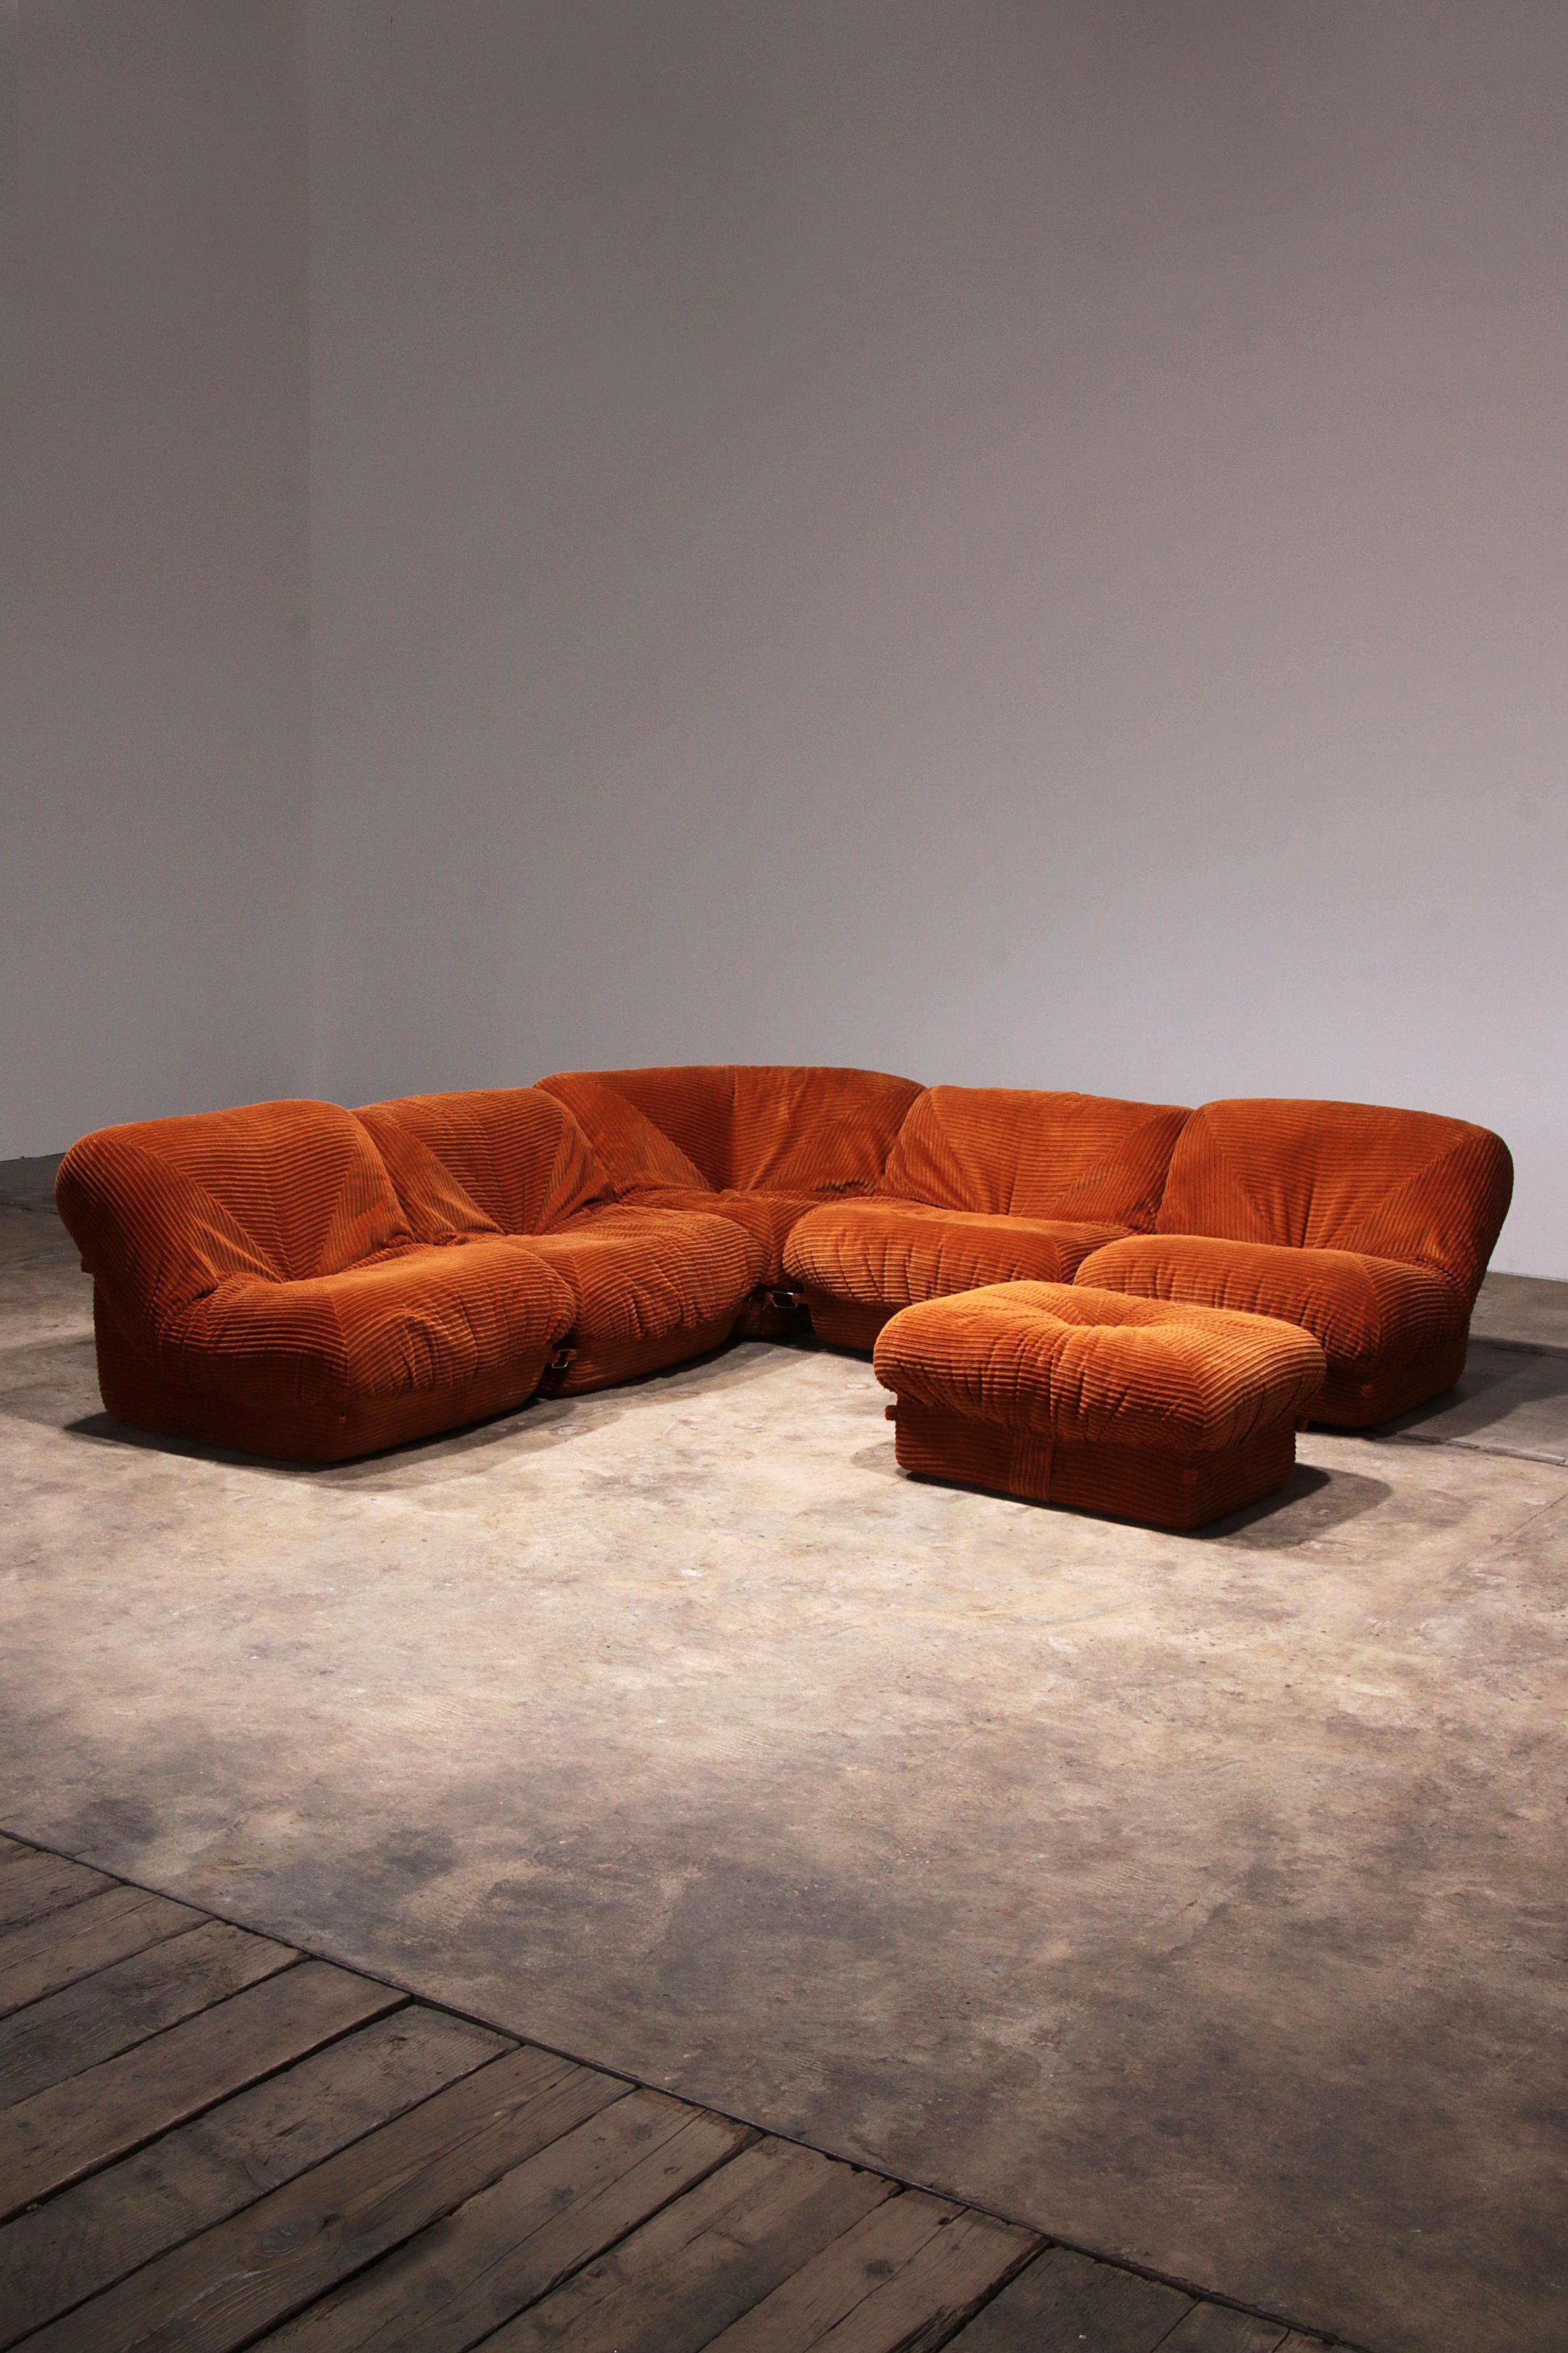 Airborne sectional sofa with ottoman 'Patate' in orange Corduroy wide ribbed fabric

Discover ultimate comfort with the Airborne sectional sofa with ottoman
  'Patate', made in striking orange corduroy with wide ribbed fabric. This stylish sofa,